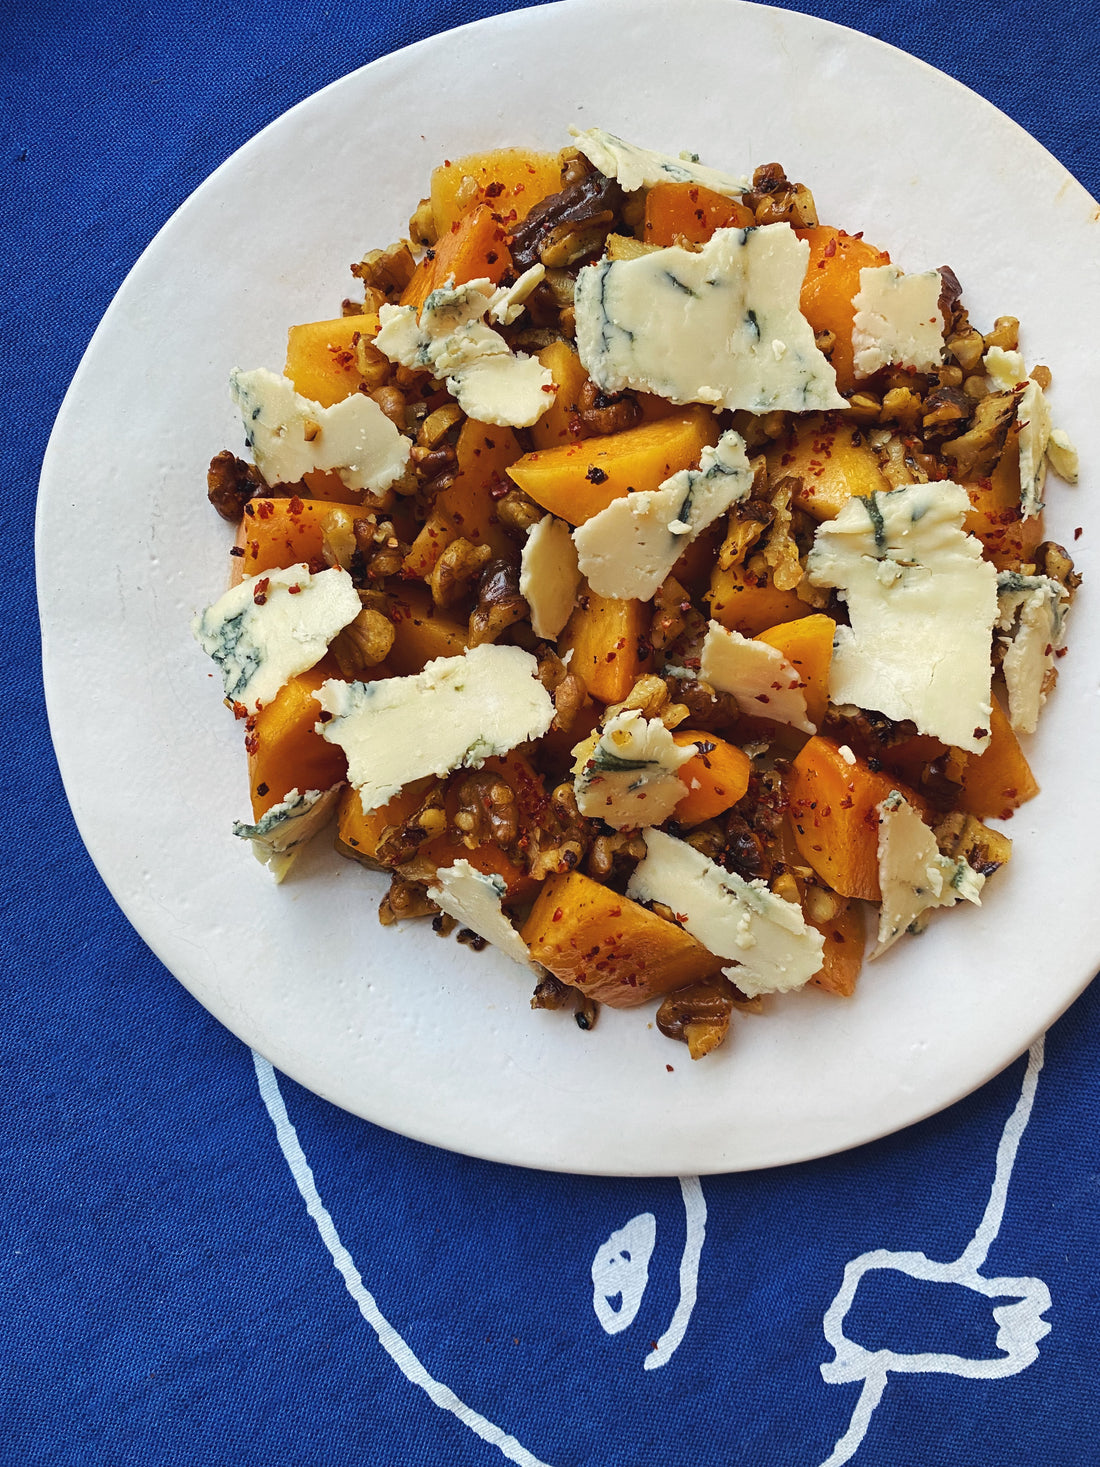 Persimmon, Toasted Walnut, Blue Cheese, & Fire Cider Salad